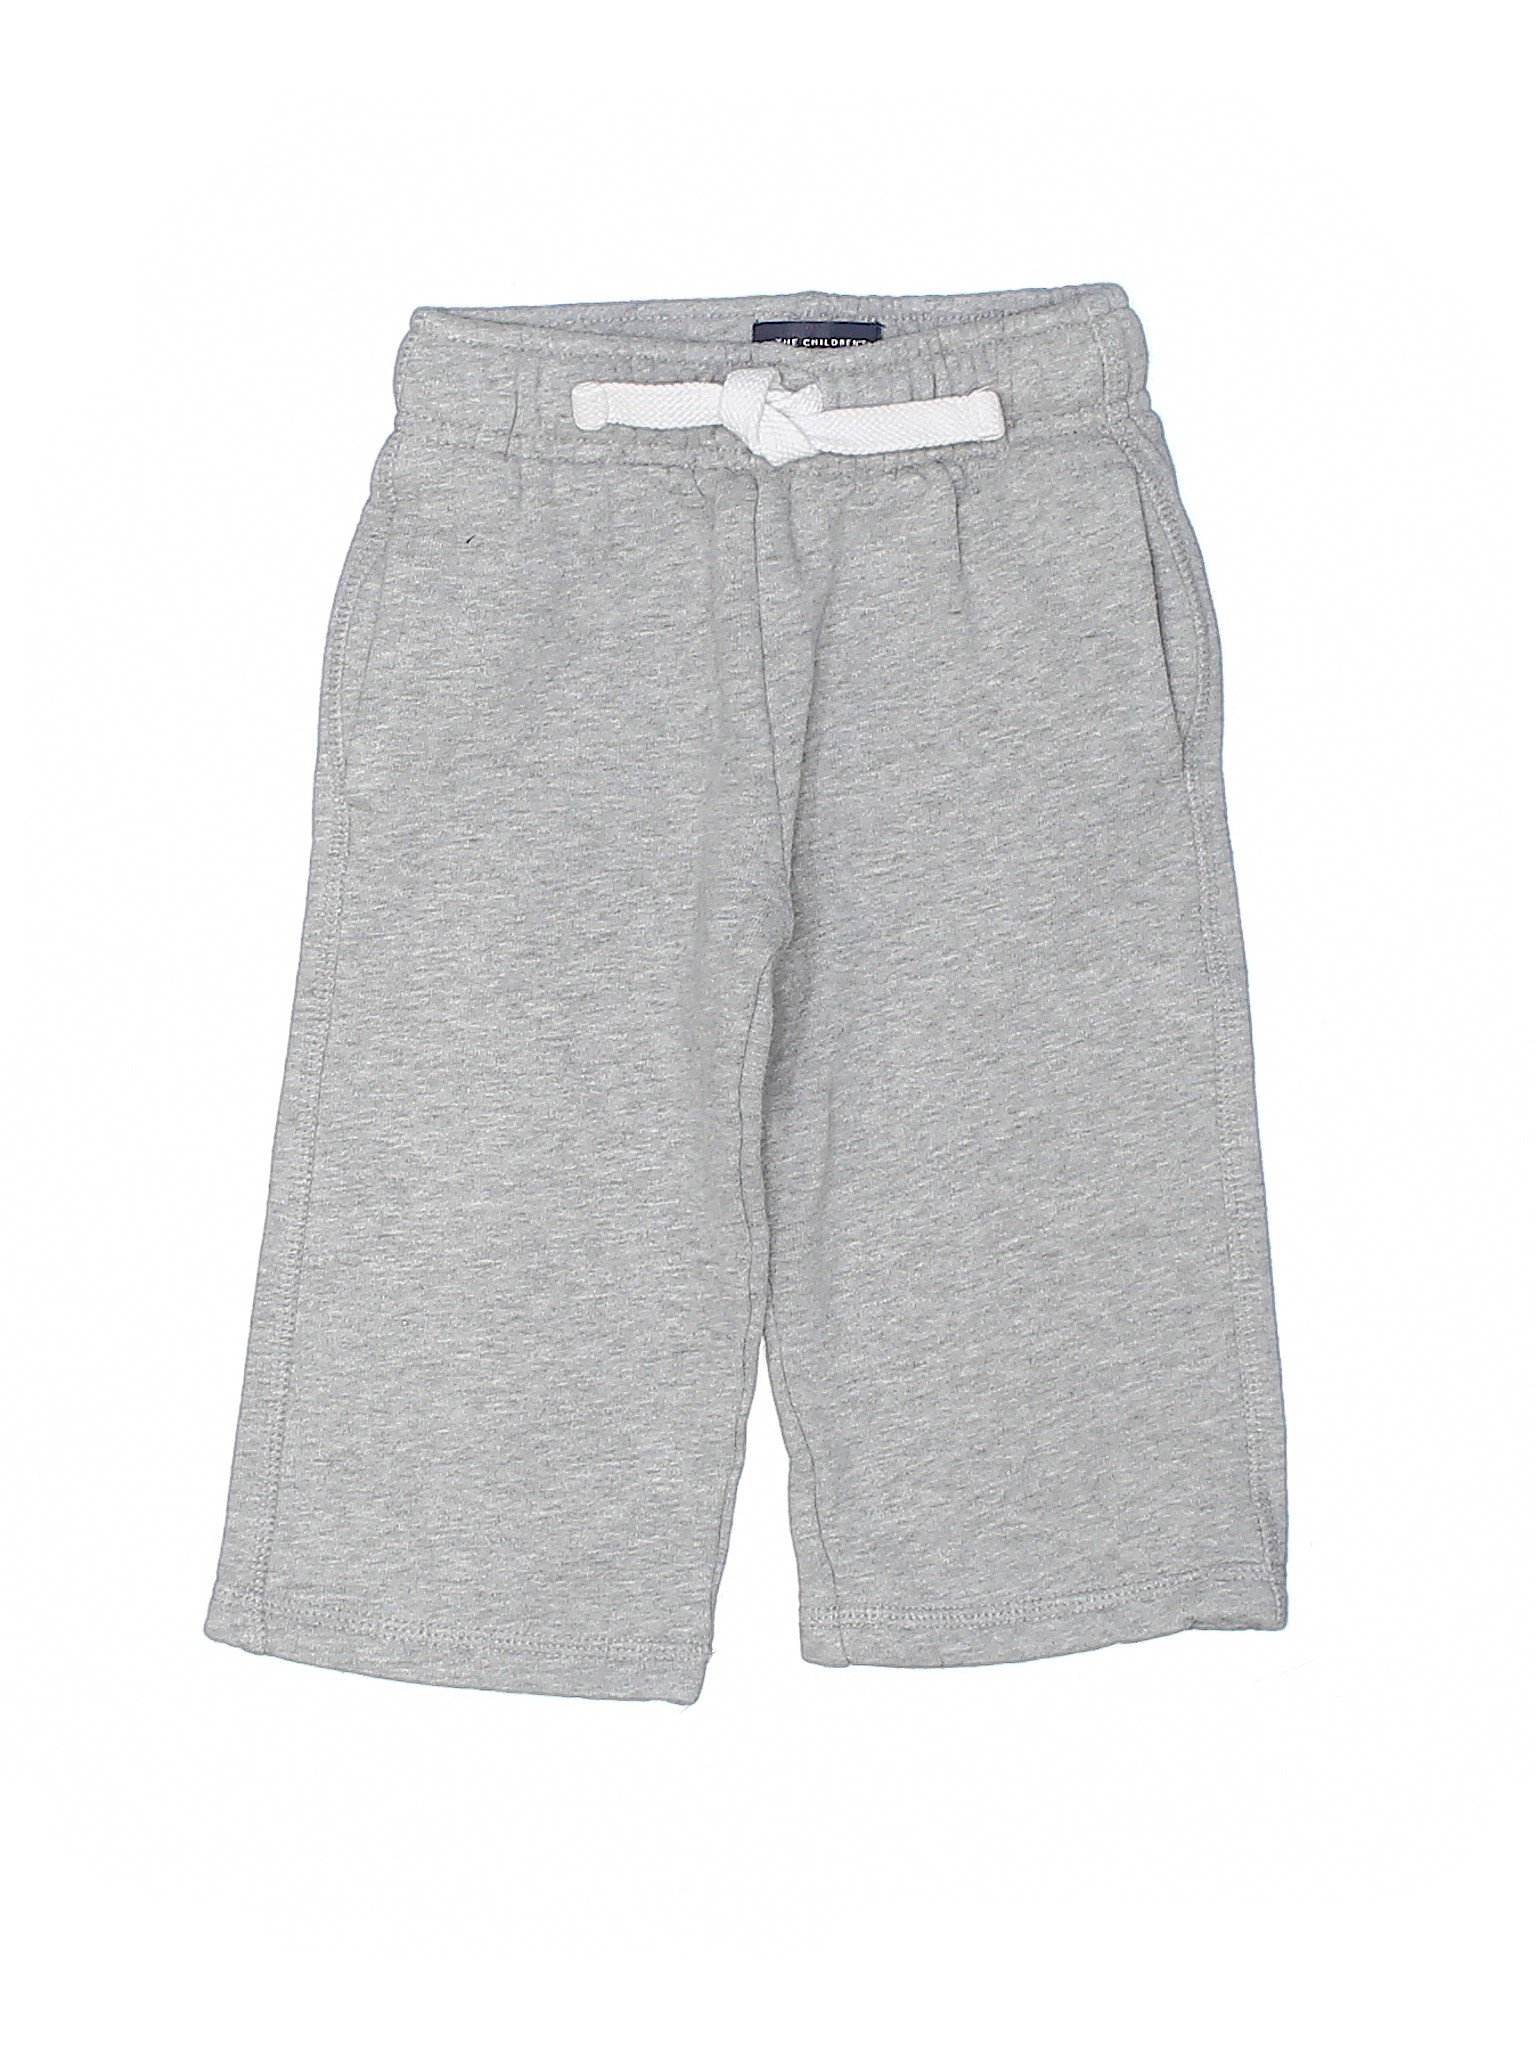 The Childrens Place Baby Boys Waistband Knit Shorts